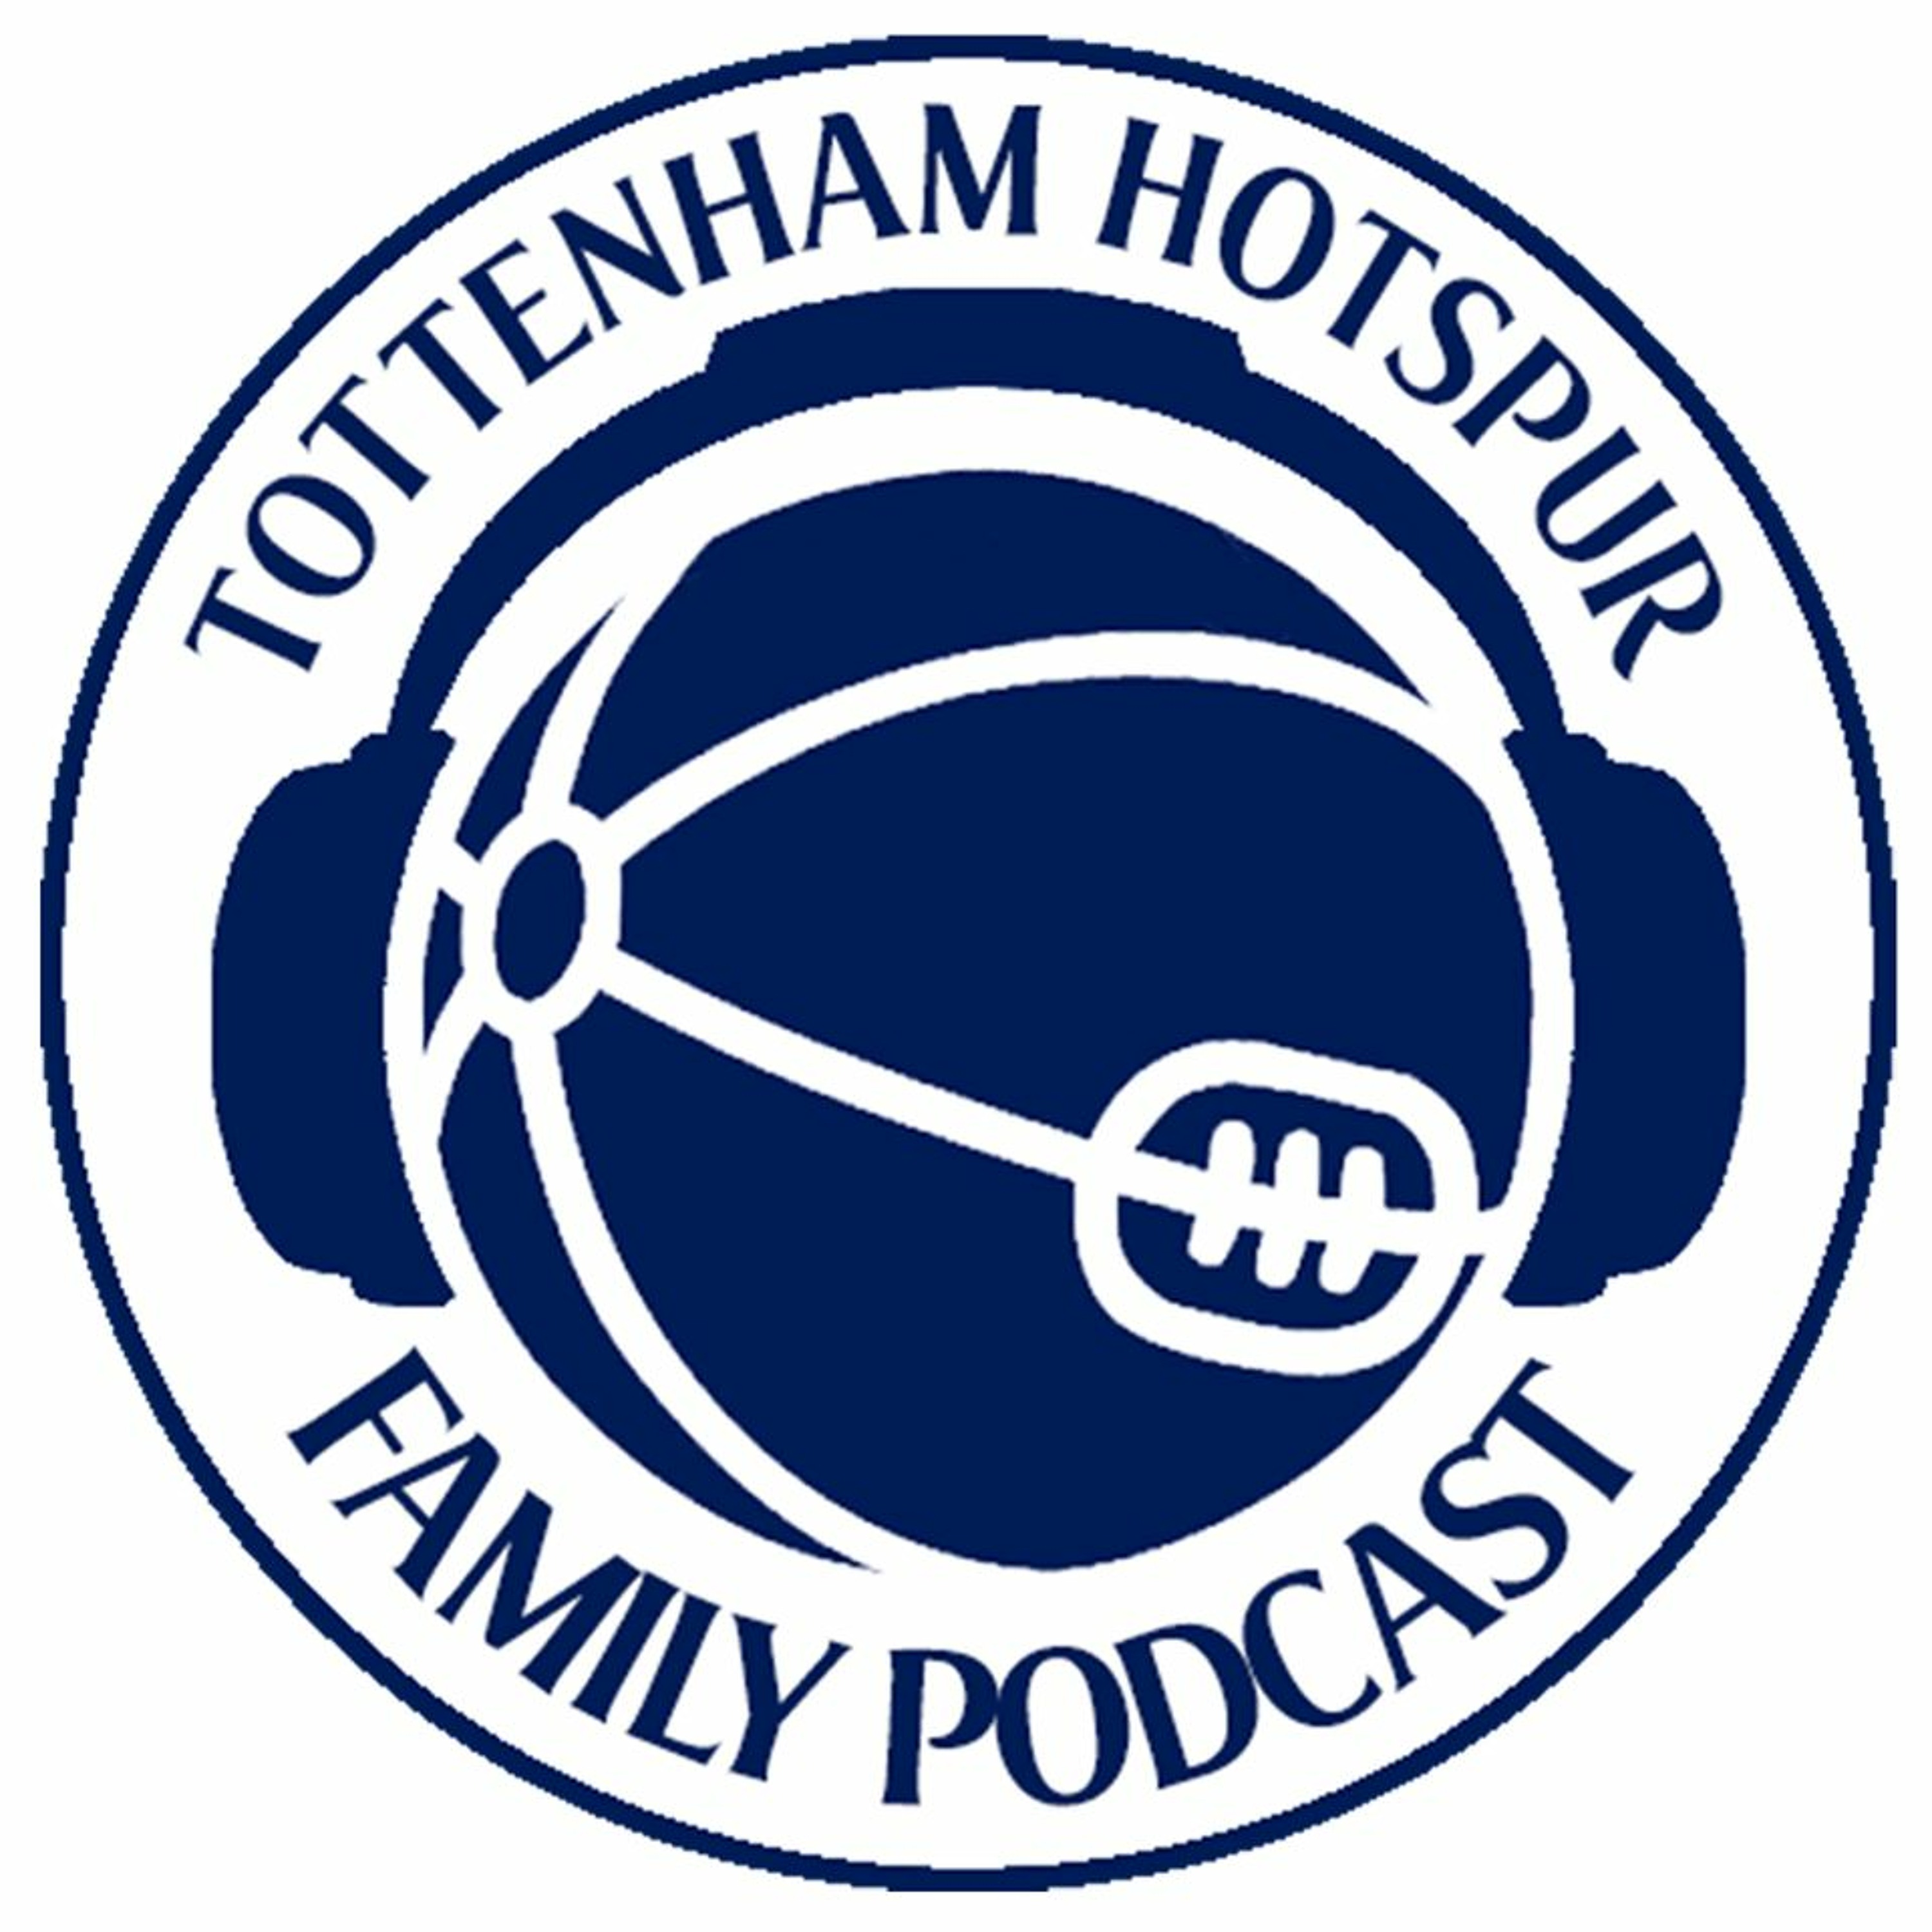 The Tottenham Hotspur Family Podcast - S5EP21 From Spurs to Jimothy